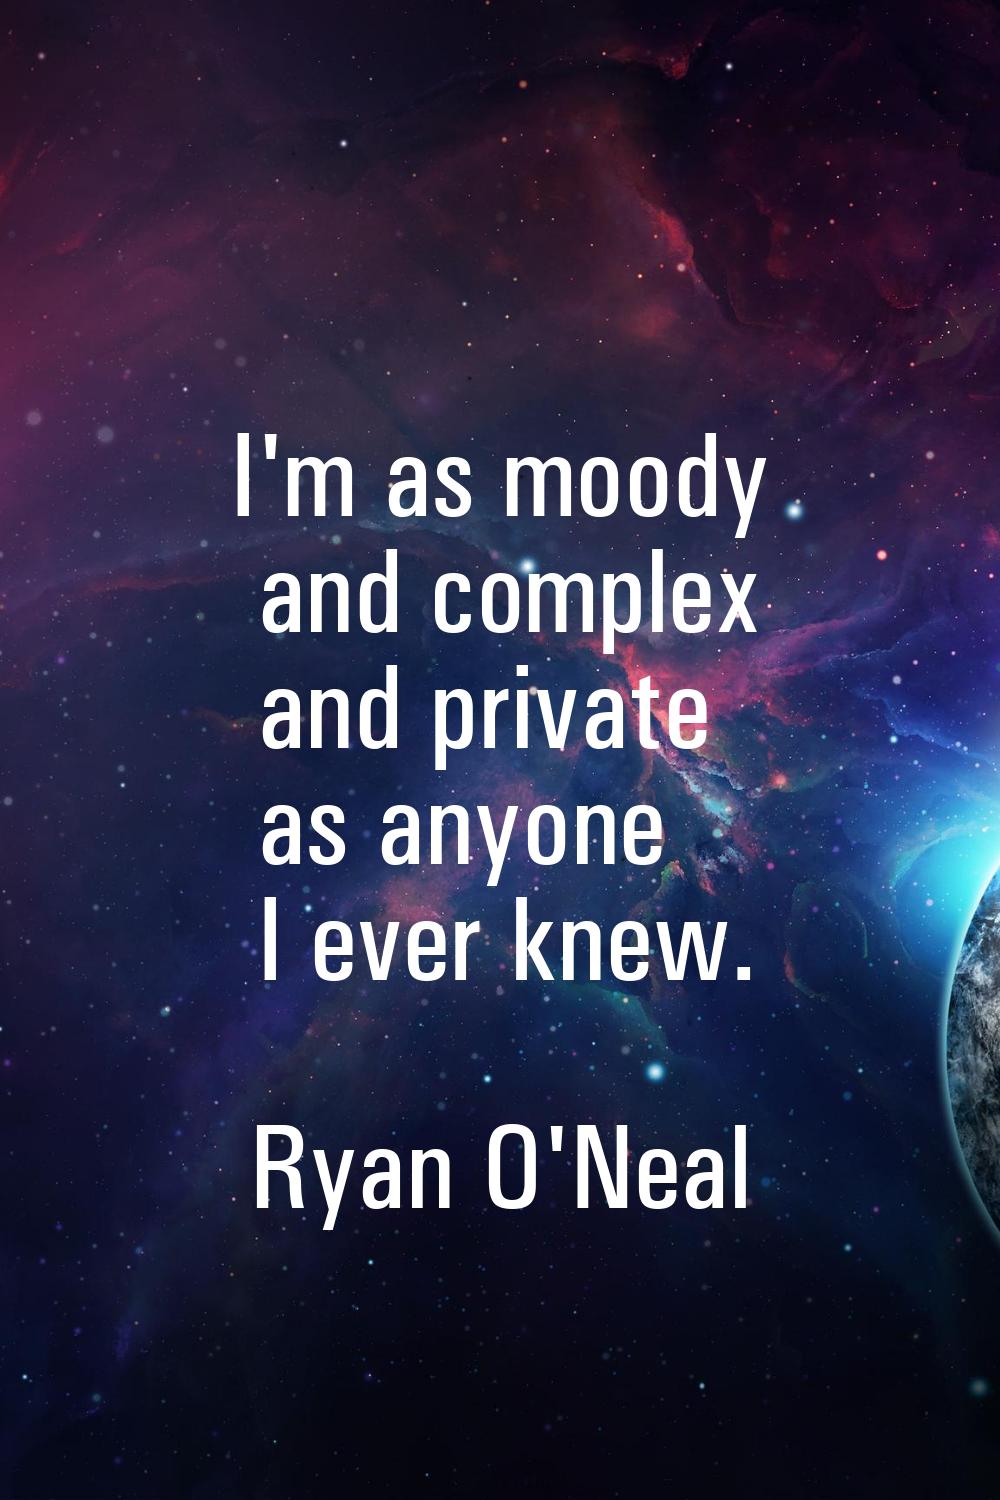 I'm as moody and complex and private as anyone I ever knew.